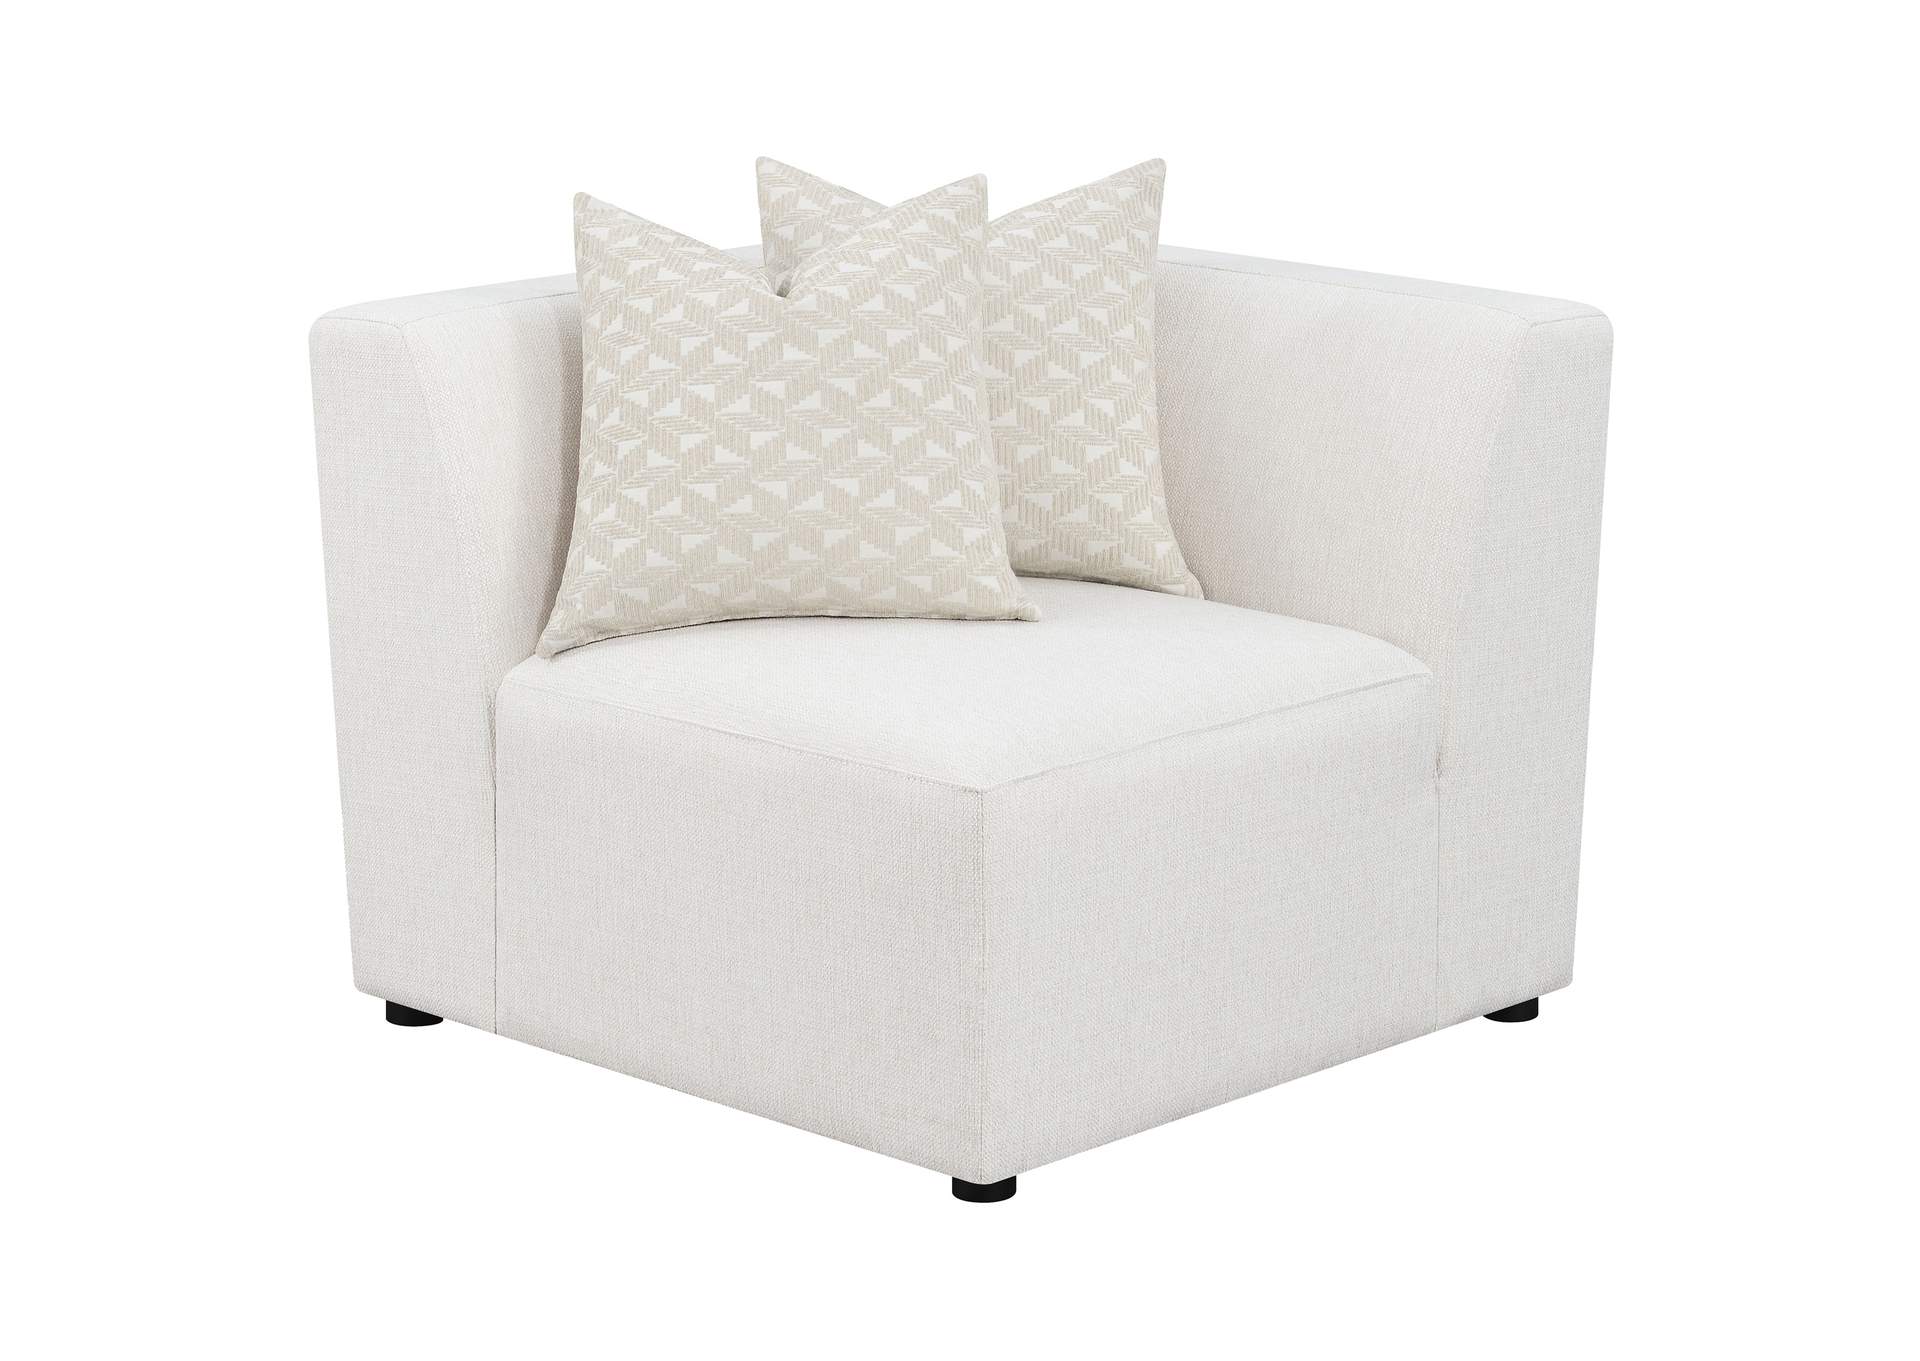 Freddie 7-piece Upholstered Modular Sectional Pearl,Coaster Furniture